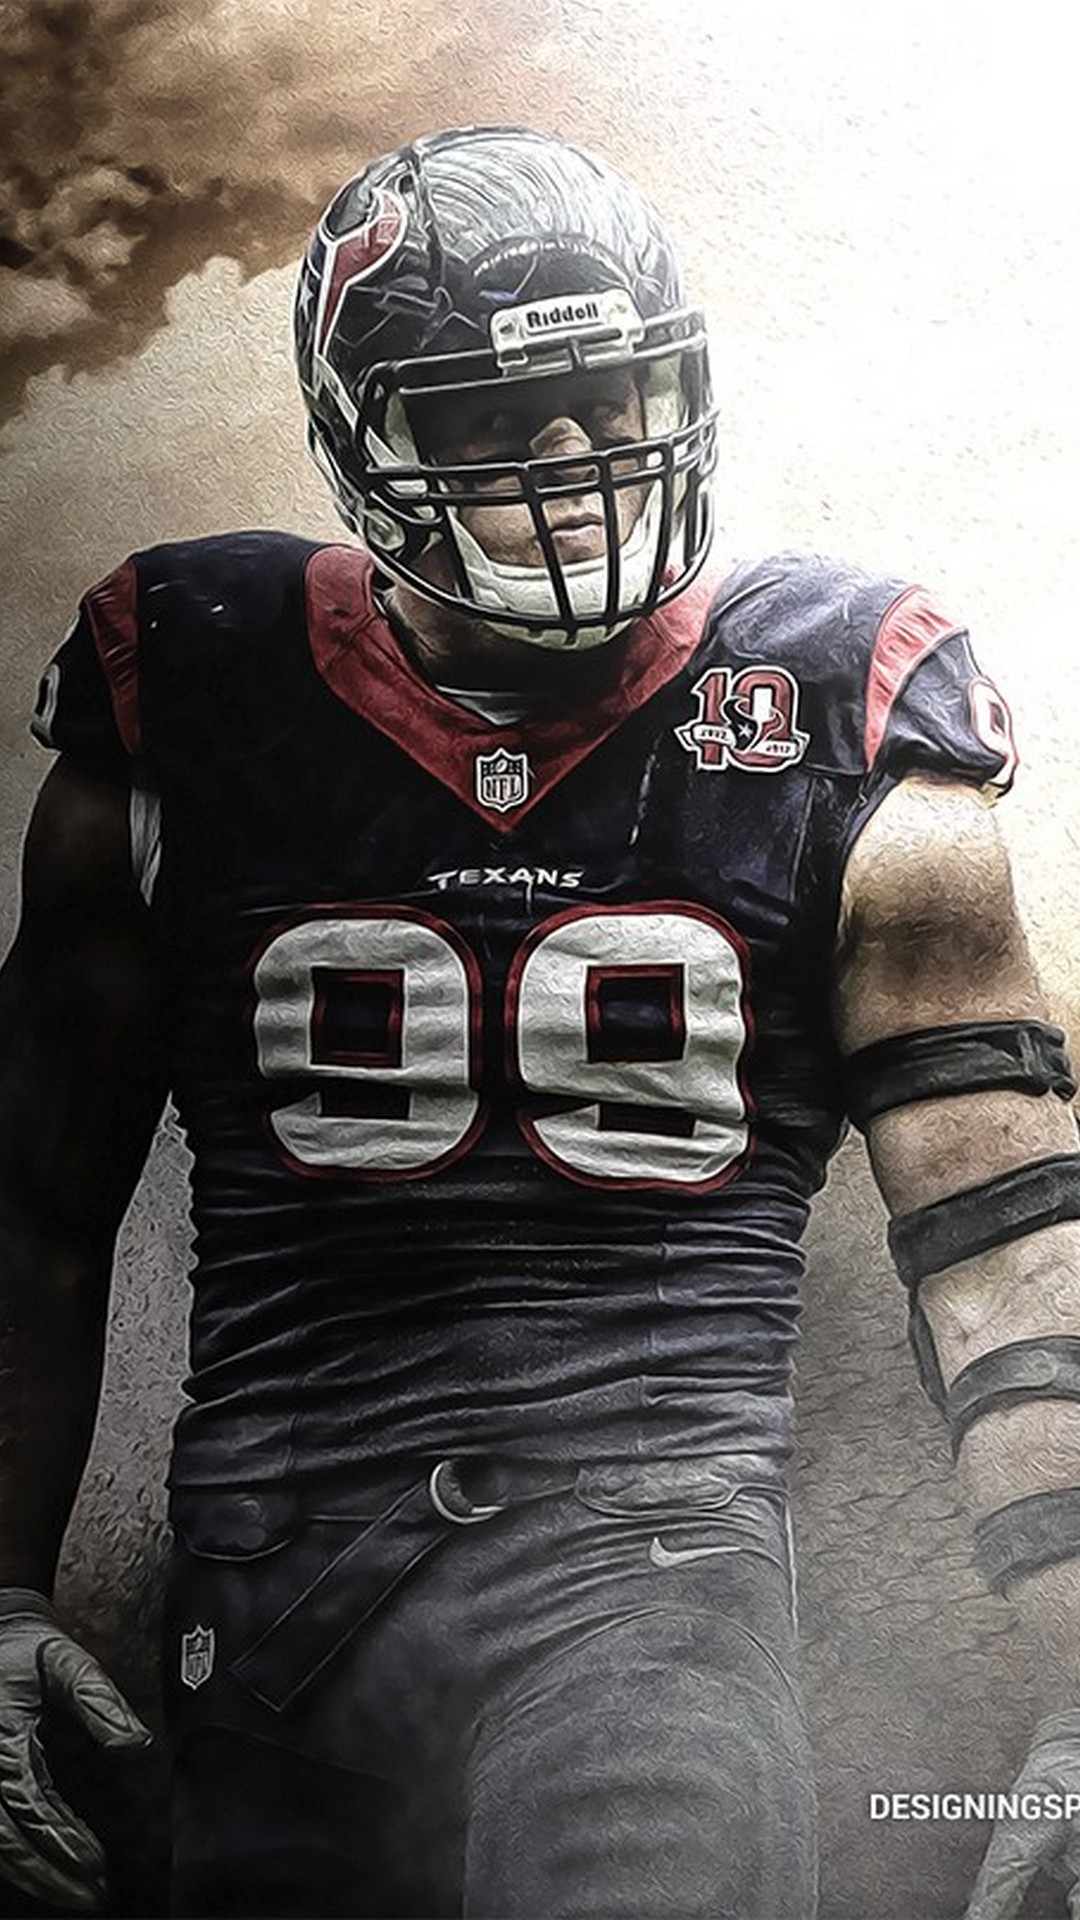 JJ Watt iPhone Screen Lock Wallpaper with high-resolution 1080x1920 pixel. Download and set as wallpaper for Apple iPhone X, XS Max, XR, 8, 7, 6, SE, iPad, Android